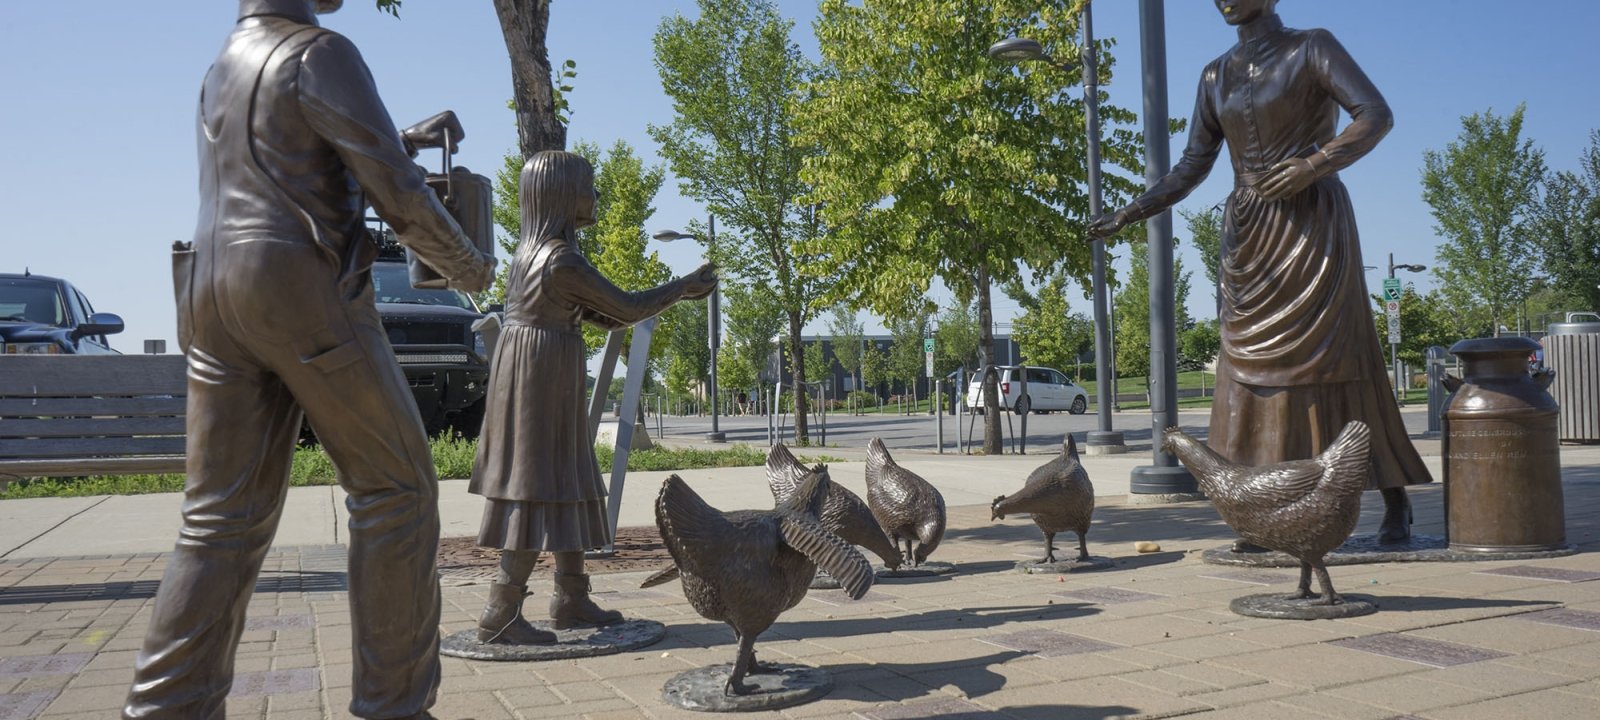 A Guide to Saskatoon’s Statues of People and their Stories – Part 1